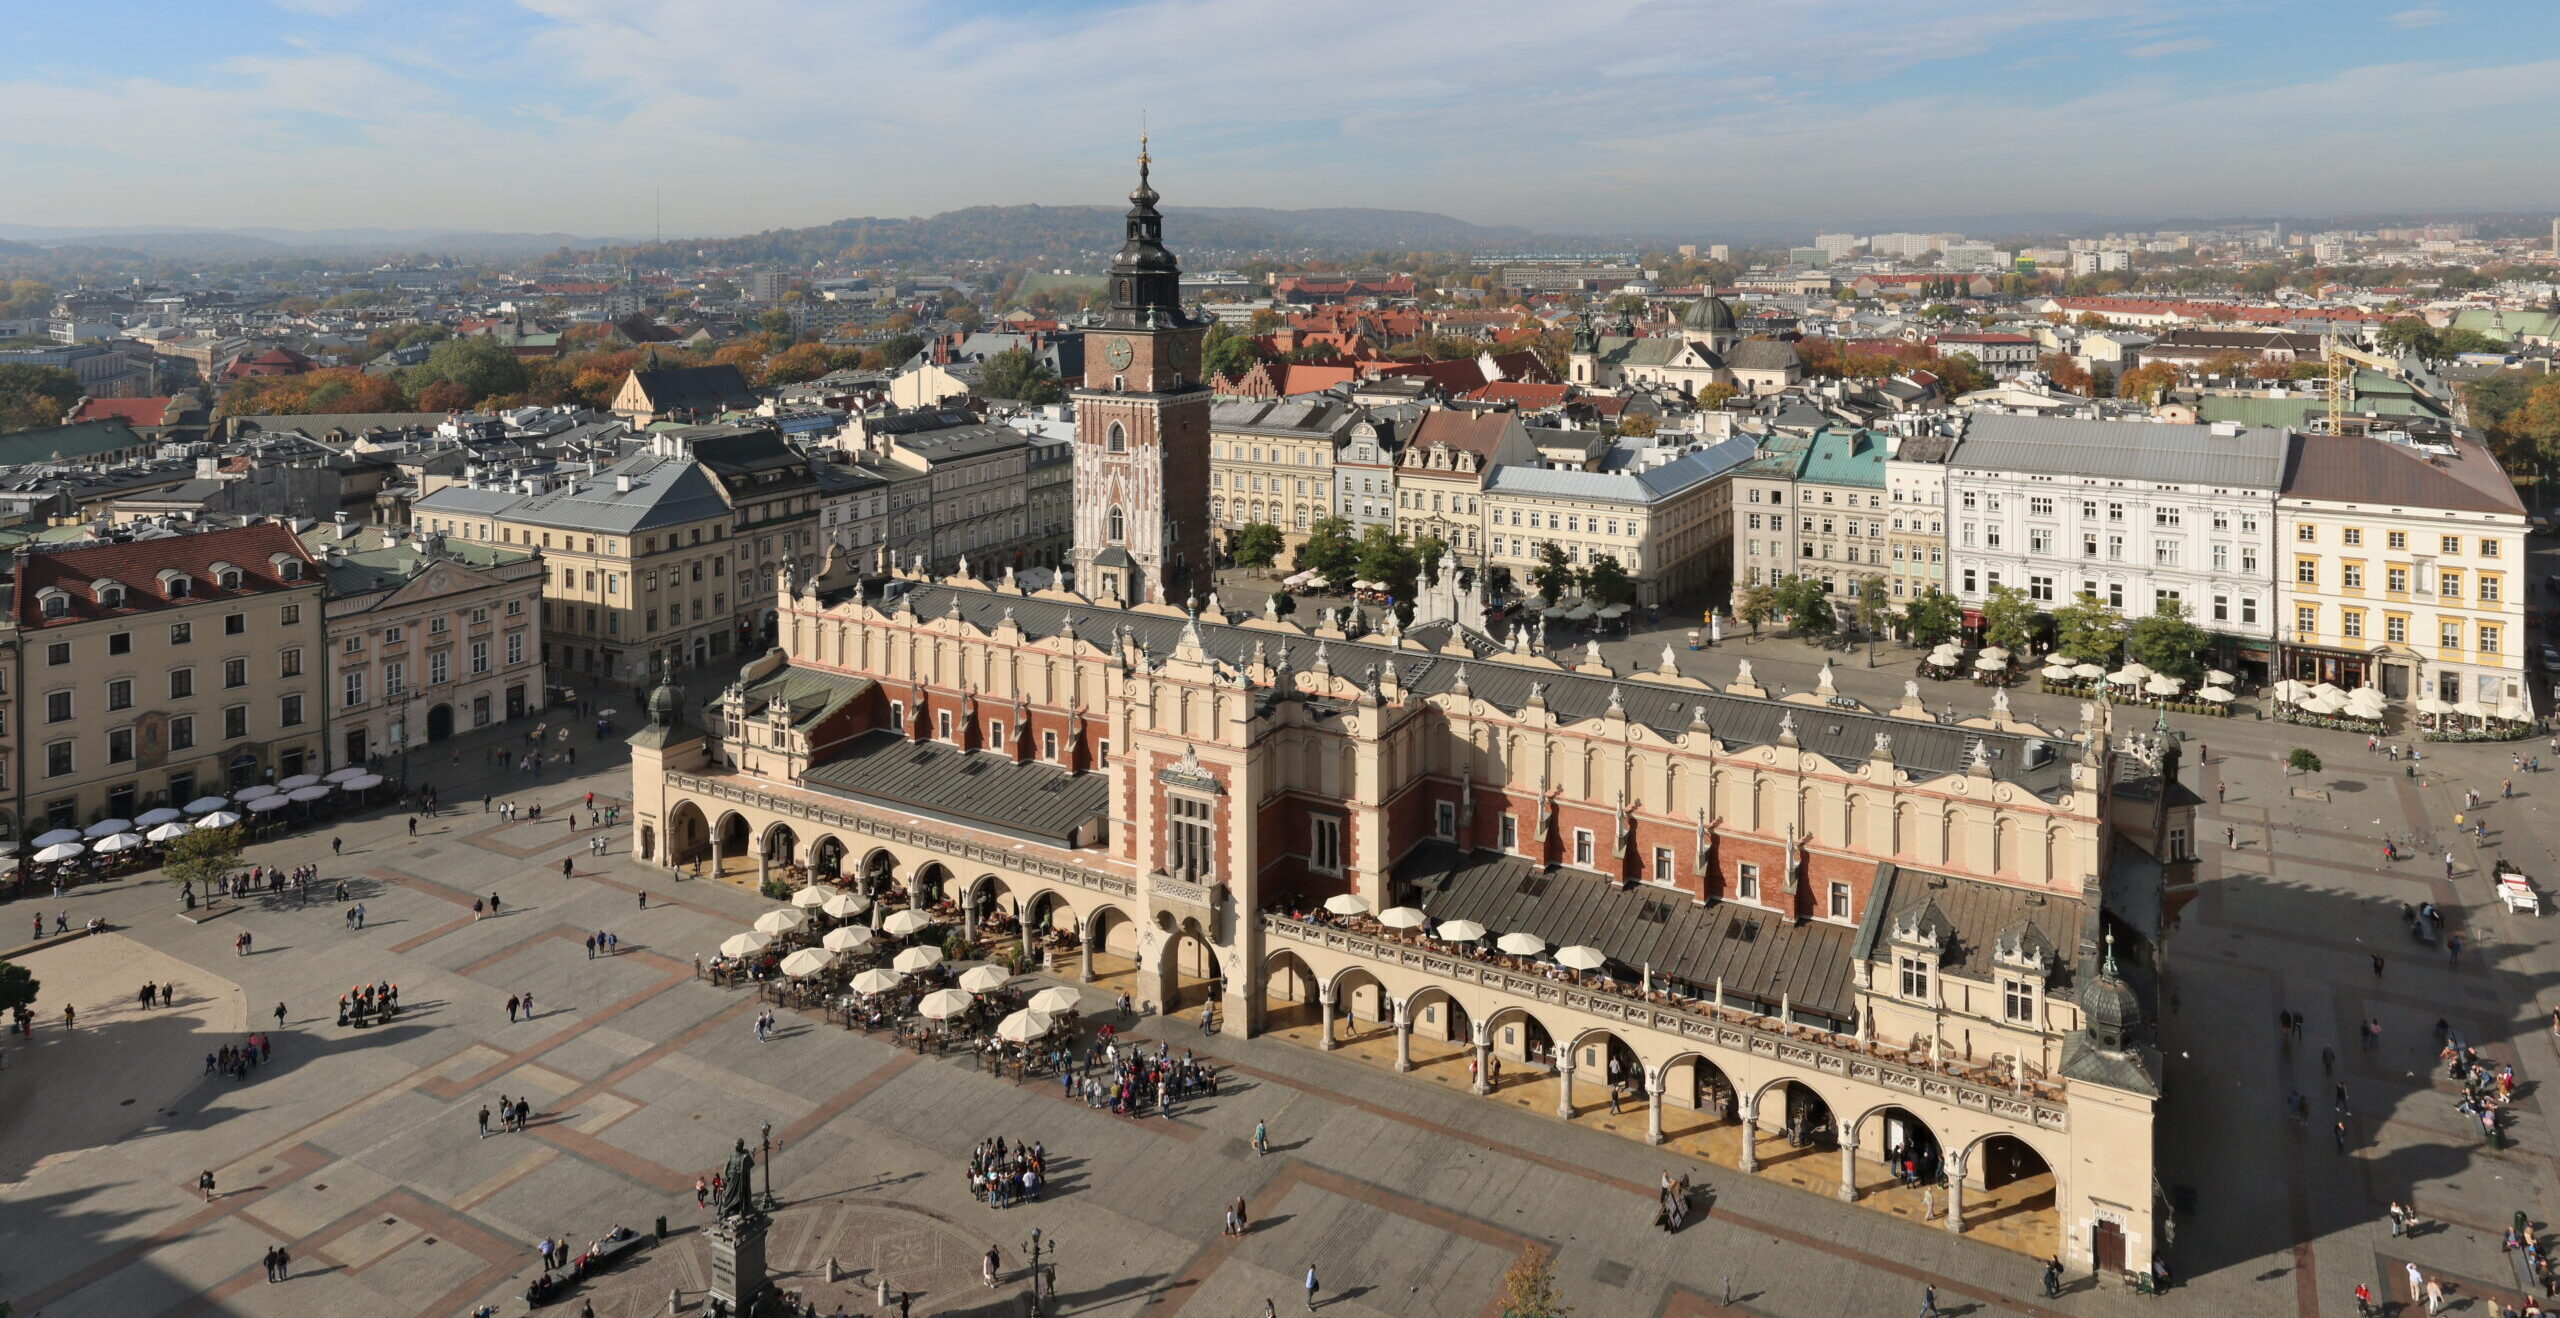 SAVE THE DATE | The LRE Forum 2025 will take place in Krakow, Poland, from 10-13 March